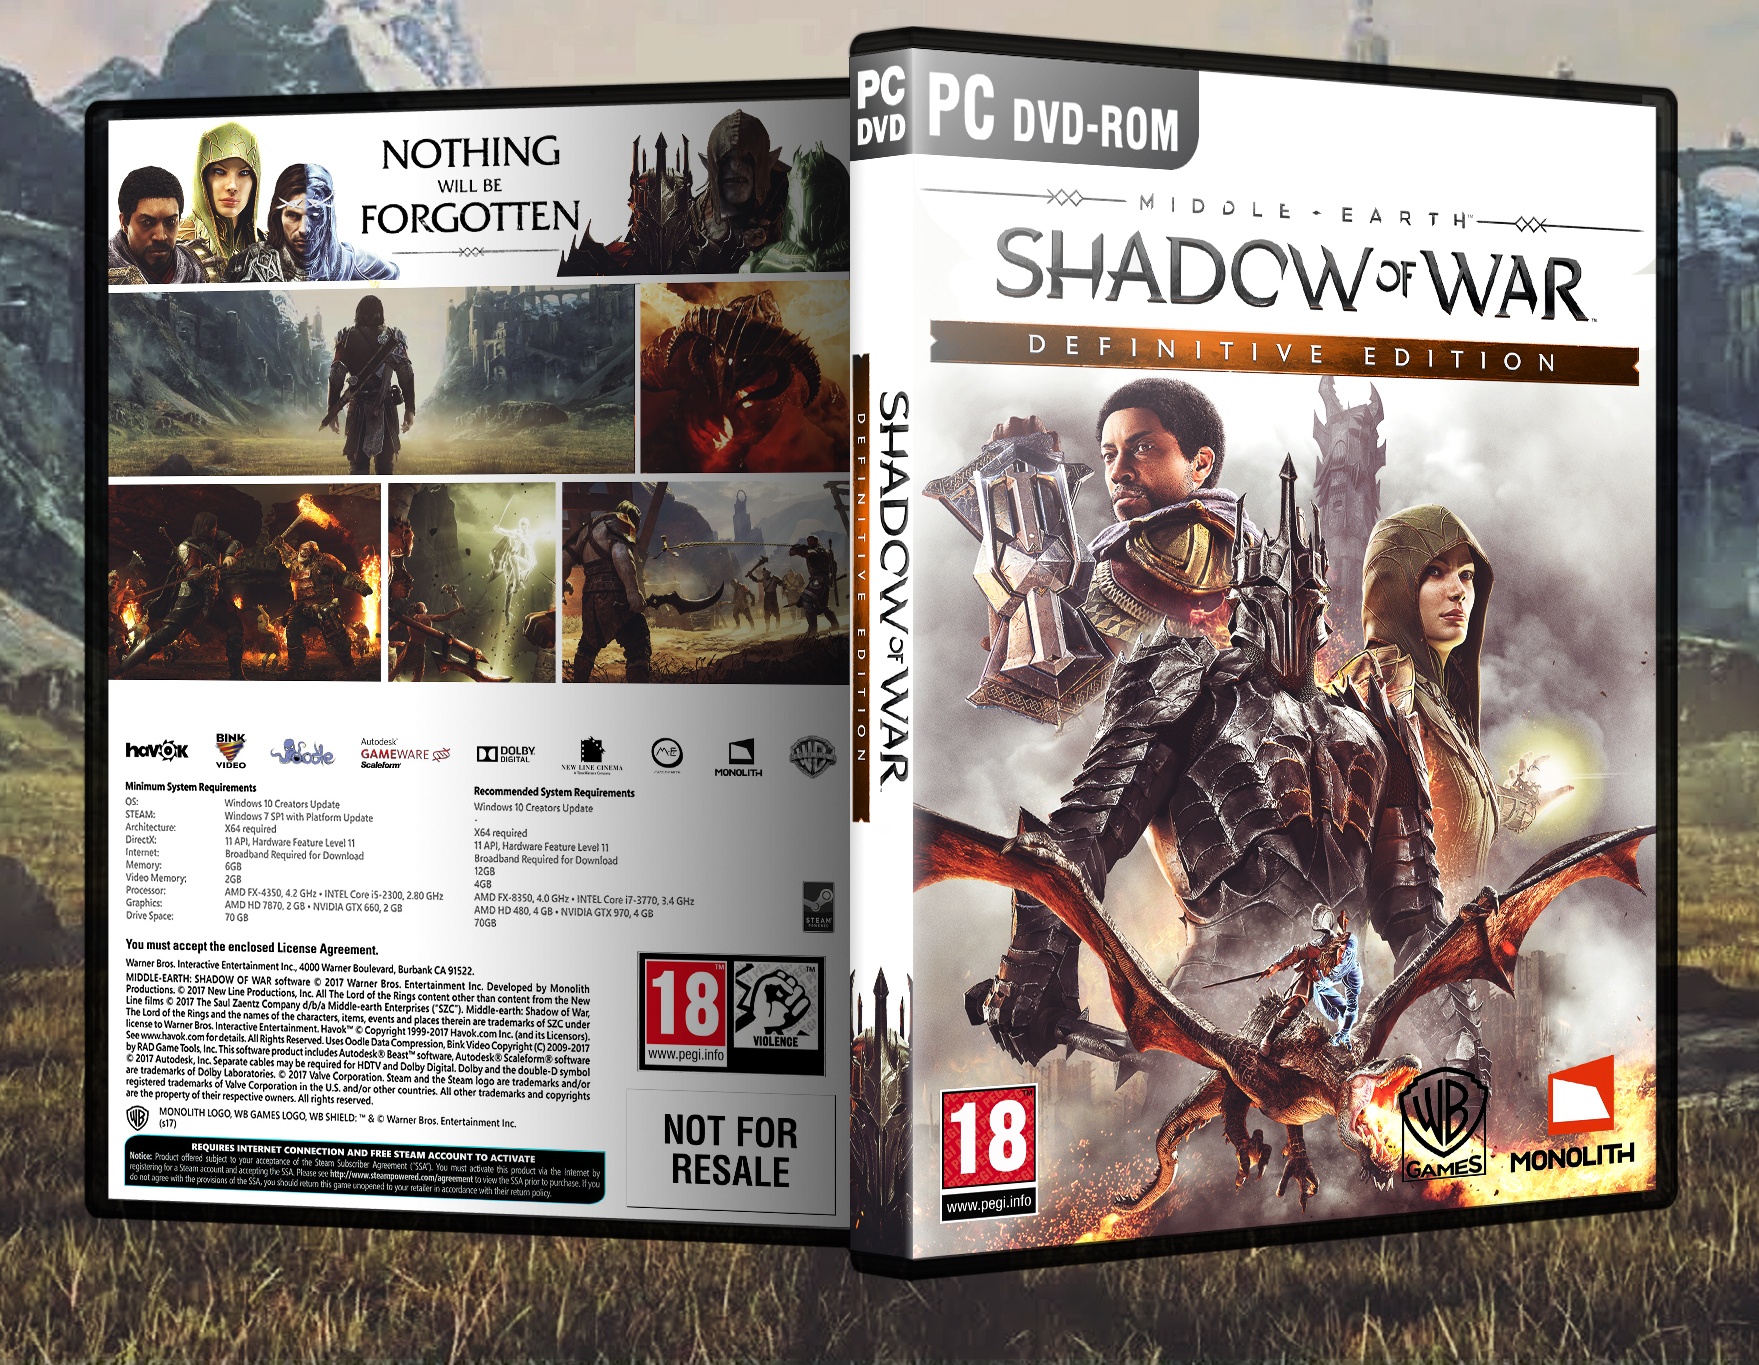 Middle-earth: Shadow of War Definitive Edition box cover